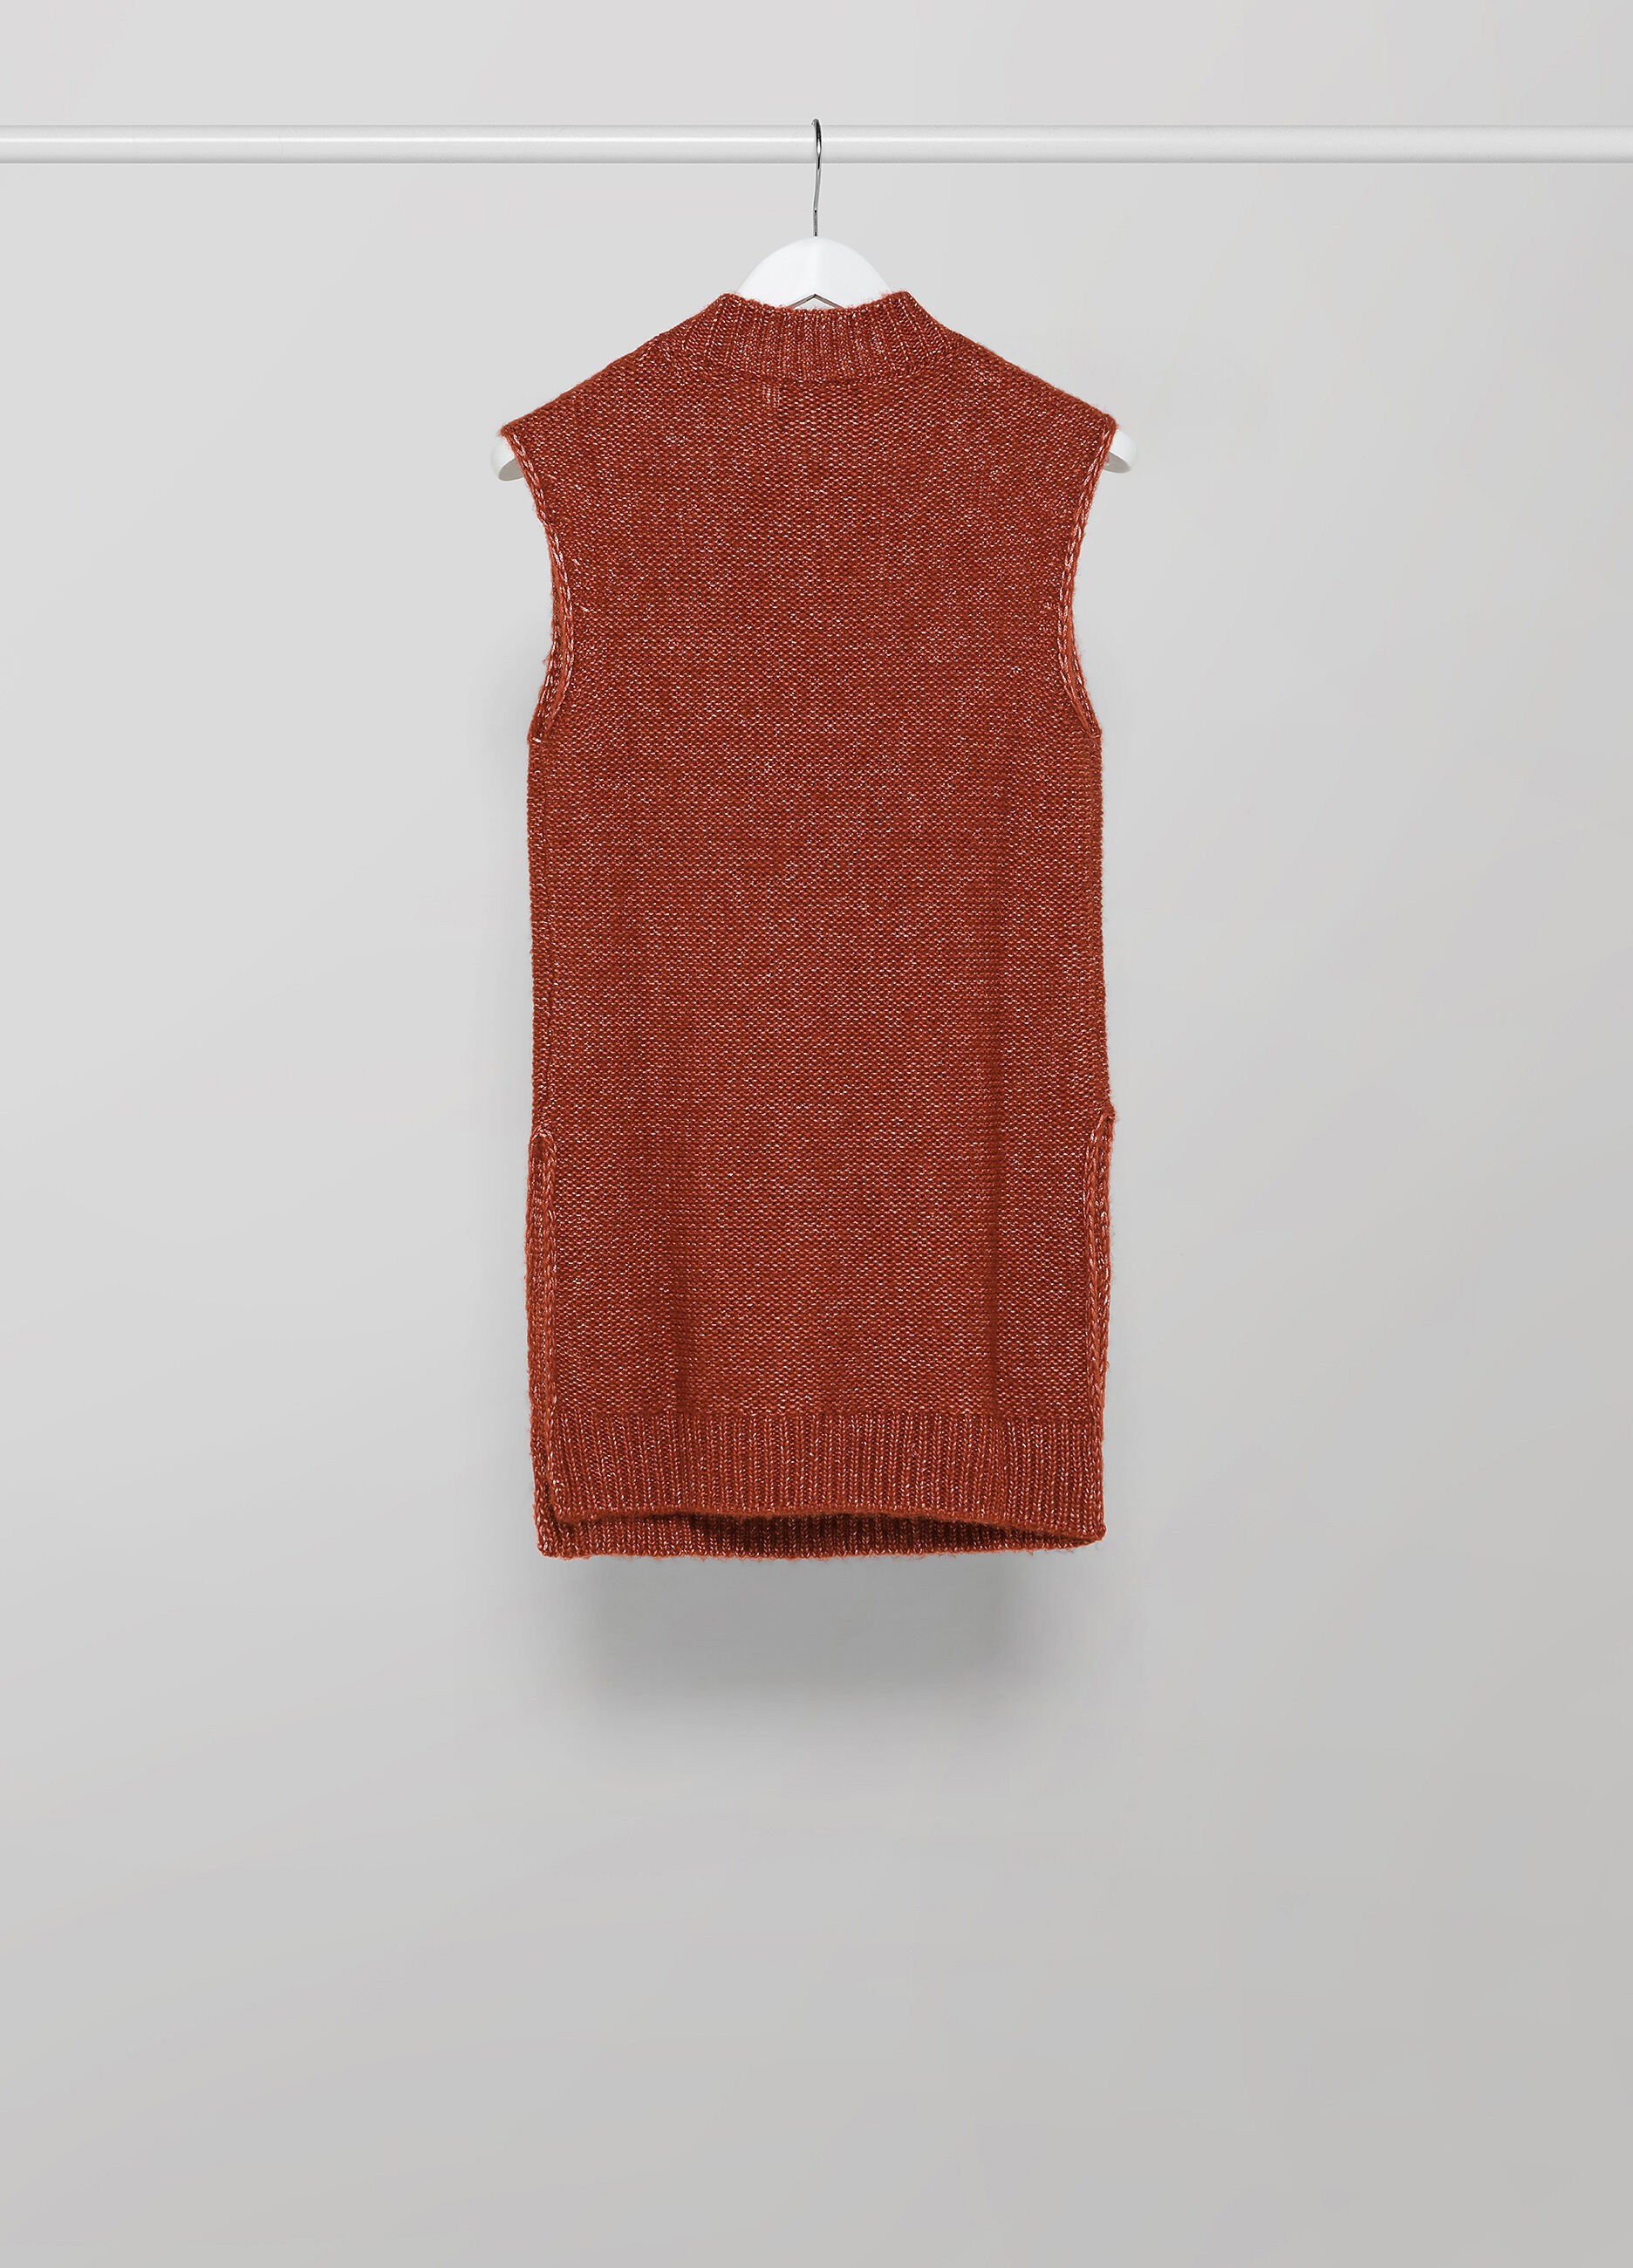 Sleeveless tricot in wool blend